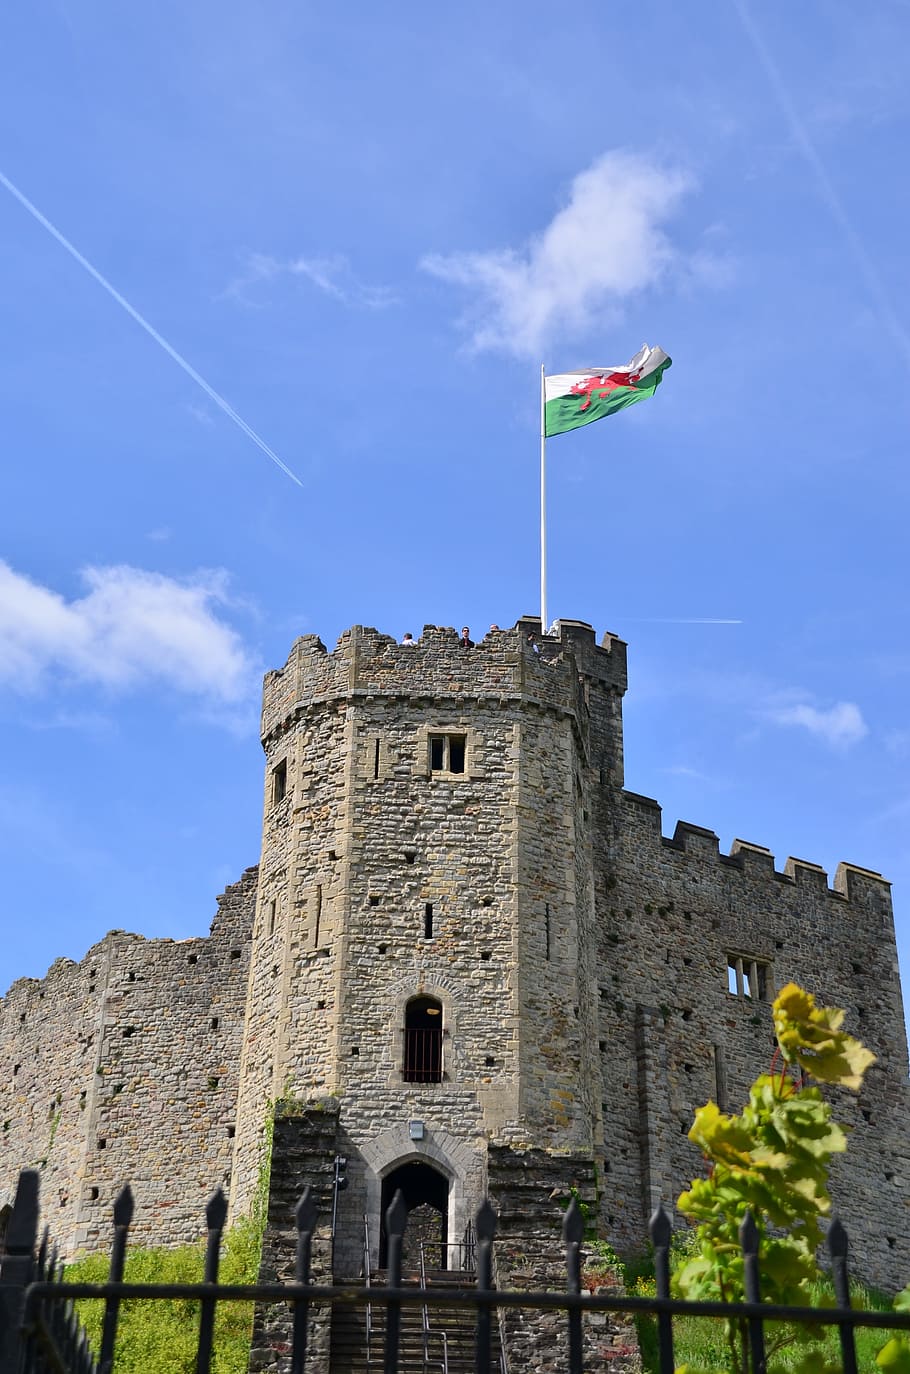 Castle, Medieval, Flag, Cardiff, Wales, old, architecture, building